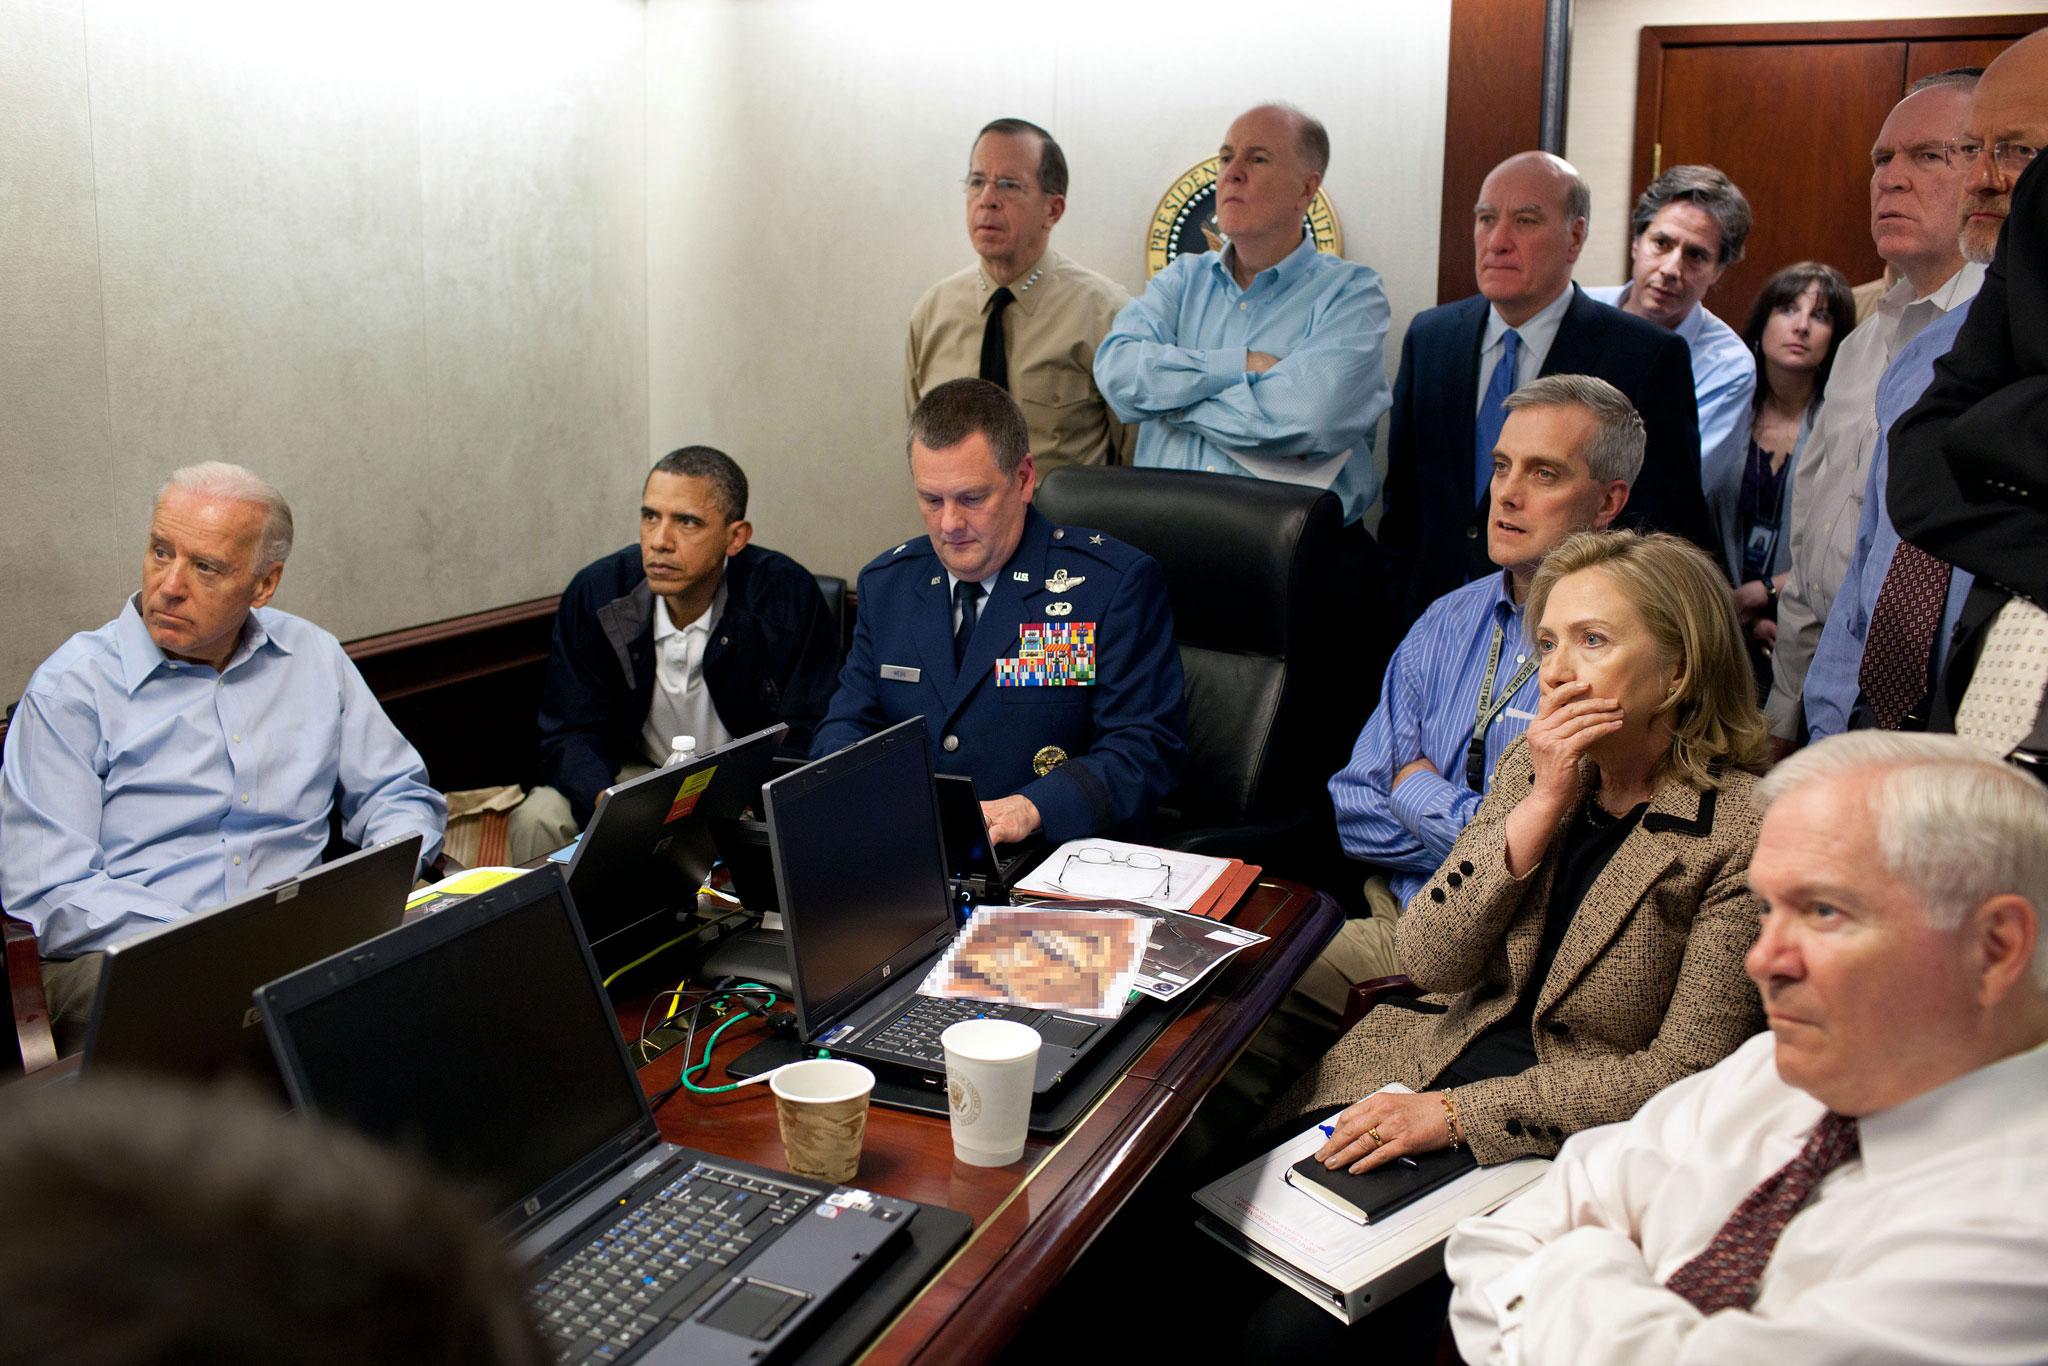 Barack Obama and then-Secretary of State Hillary Clinton with US national security officials as soldiers carry out the raid that killed Osama Bin Laden